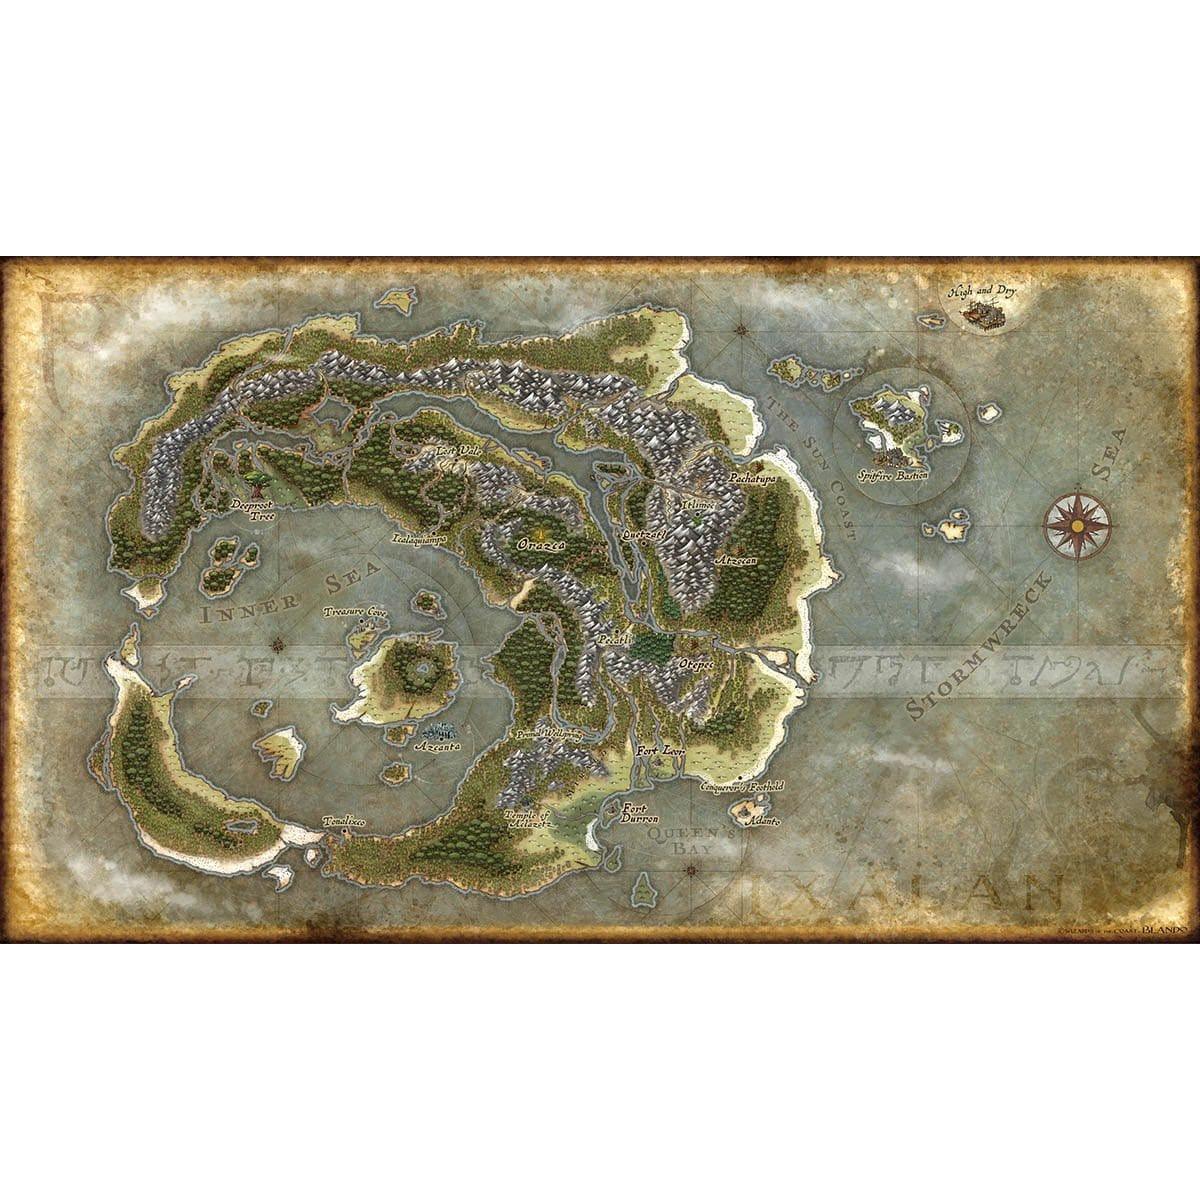 Ixalan Map Print - Print - Original Magic Art - Accessories for Magic the Gathering and other card games